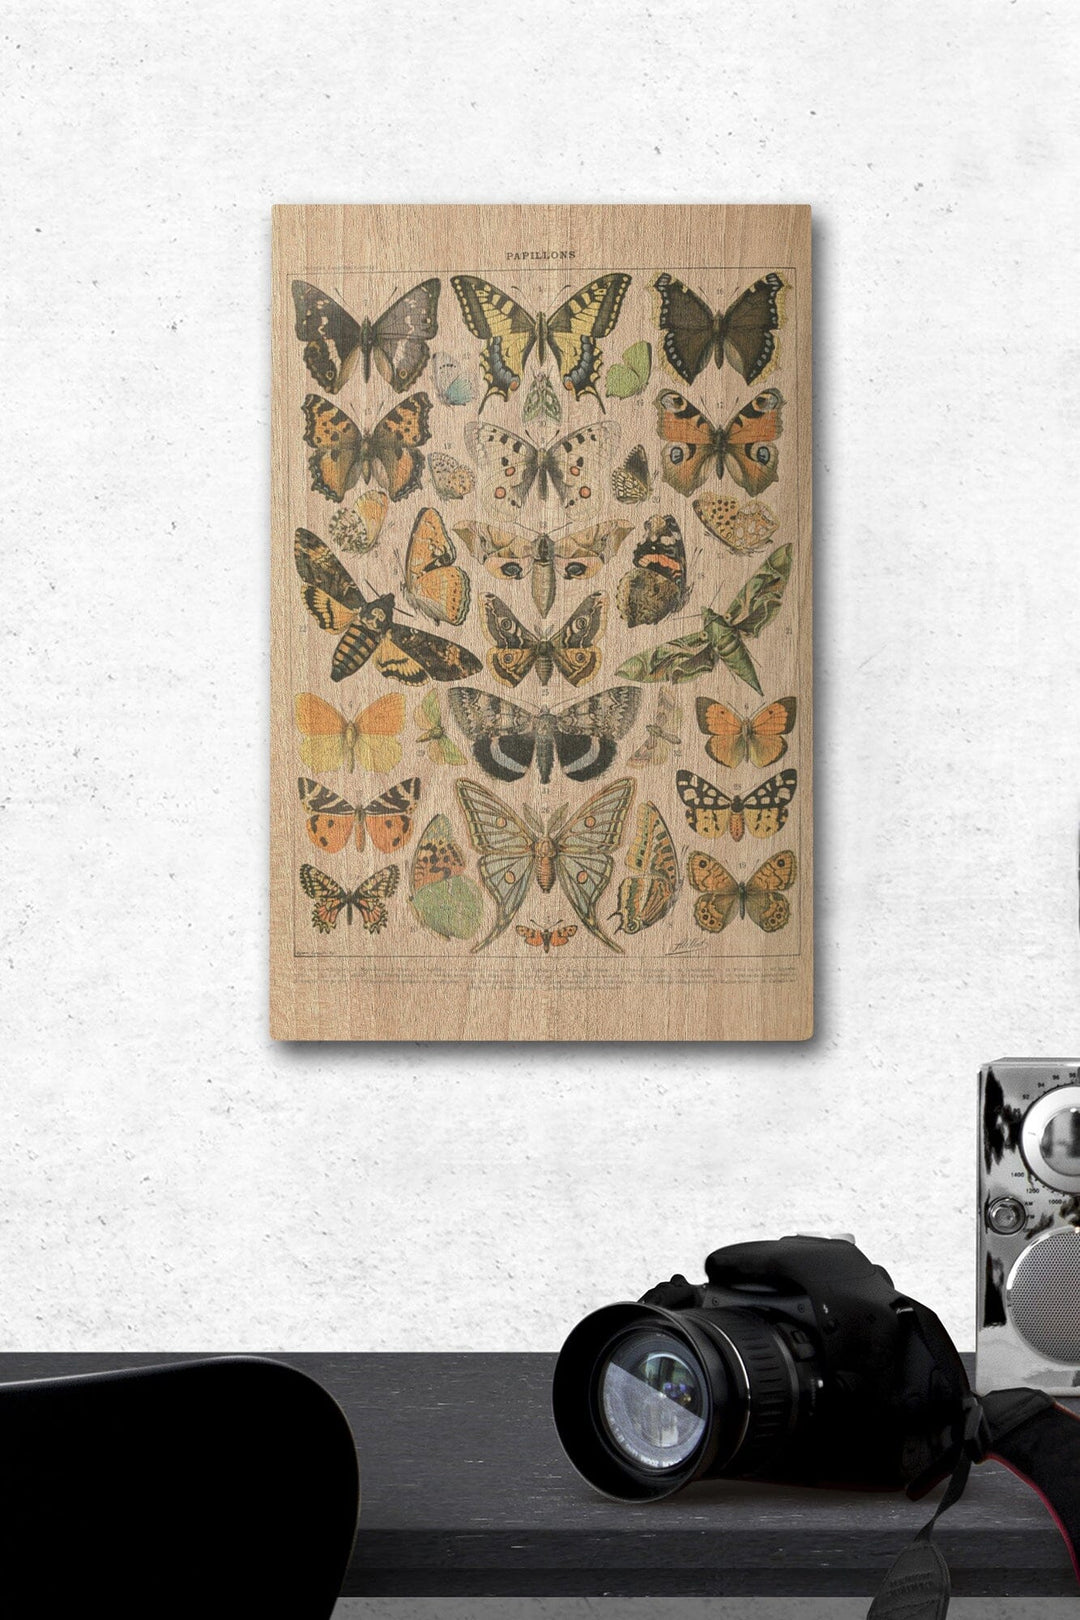 Butterflies, A, Vintage Bookplate, Adolphe Millot Artwork, Wood Signs and Postcards Wood Lantern Press 12 x 18 Wood Gallery Print 